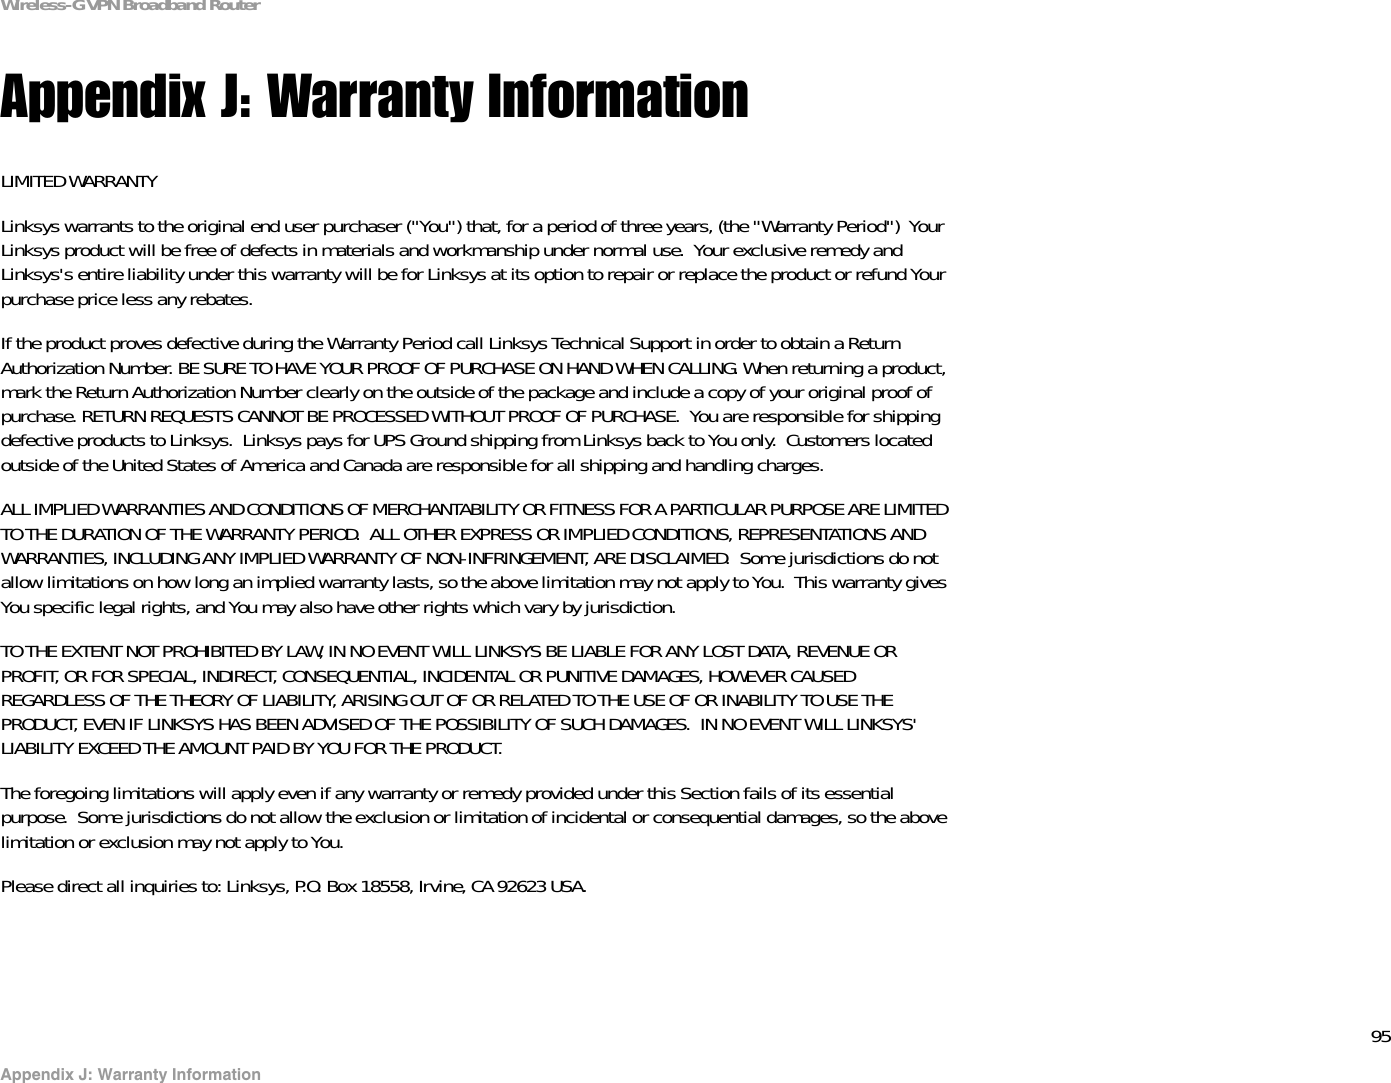 95Appendix J: Warranty InformationWireless-G VPN Broadband RouterAppendix J: Warranty InformationLIMITED WARRANTYLinksys warrants to the original end user purchaser (&quot;You&quot;) that, for a period of three years, (the &quot;Warranty Period&quot;)  Your Linksys product will be free of defects in materials and workmanship under normal use.  Your exclusive remedy and Linksys&apos;s entire liability under this warranty will be for Linksys at its option to repair or replace the product or refund Yourpurchase price less any rebates.If the product proves defective during the Warranty Period call Linksys Technical Support in order to obtain a Return Authorization Number. BE SURE TO HAVE YOUR PROOF OF PURCHASE ON HAND WHEN CALLING. When returning a product, mark the Return Authorization Number clearly on the outside of the package and include a copy of your original proof of purchase. RETURN REQUESTS CANNOT BE PROCESSED WITHOUT PROOF OF PURCHASE.  You are responsible for shipping defective products to Linksys.  Linksys pays for UPS Ground shipping from Linksys back to You only.  Customers located outside of the United States of America and Canada are responsible for all shipping and handling charges. ALL IMPLIED WARRANTIES AND CONDITIONS OF MERCHANTABILITY OR FITNESS FOR A PARTICULAR PURPOSE ARE LIMITED TO THE DURATION OF THE WARRANTY PERIOD.  ALL OTHER EXPRESS OR IMPLIED CONDITIONS, REPRESENTATIONS AND WARRANTIES, INCLUDING ANY IMPLIED WARRANTY OF NON-INFRINGEMENT, ARE DISCLAIMED.  Some jurisdictions do not allow limitations on how long an implied warranty lasts, so the above limitation may not apply to You.  This warranty gives You specific legal rights, and You may also have other rights which vary by jurisdiction.TO THE EXTENT NOT PROHIBITED BY LAW, IN NO EVENT WILL LINKSYS BE LIABLE FOR ANY LOST DATA, REVENUE OR PROFIT, OR FOR SPECIAL, INDIRECT, CONSEQUENTIAL, INCIDENTAL OR PUNITIVE DAMAGES, HOWEVER CAUSED REGARDLESS OF THE THEORY OF LIABILITY, ARISING OUT OF OR RELATED TO THE USE OF OR INABILITY TO USE THE PRODUCT, EVEN IF LINKSYS HAS BEEN ADVISED OF THE POSSIBILITY OF SUCH DAMAGES.  IN NO EVENT WILL LINKSYS&apos; LIABILITY EXCEED THE AMOUNT PAID BY YOU FOR THE PRODUCT.  The foregoing limitations will apply even if any warranty or remedy provided under this Section fails of its essential purpose.  Some jurisdictions do not allow the exclusion or limitation of incidental or consequential damages, so the above limitation or exclusion may not apply to You.Please direct all inquiries to: Linksys, P.O. Box 18558, Irvine, CA 92623 USA.